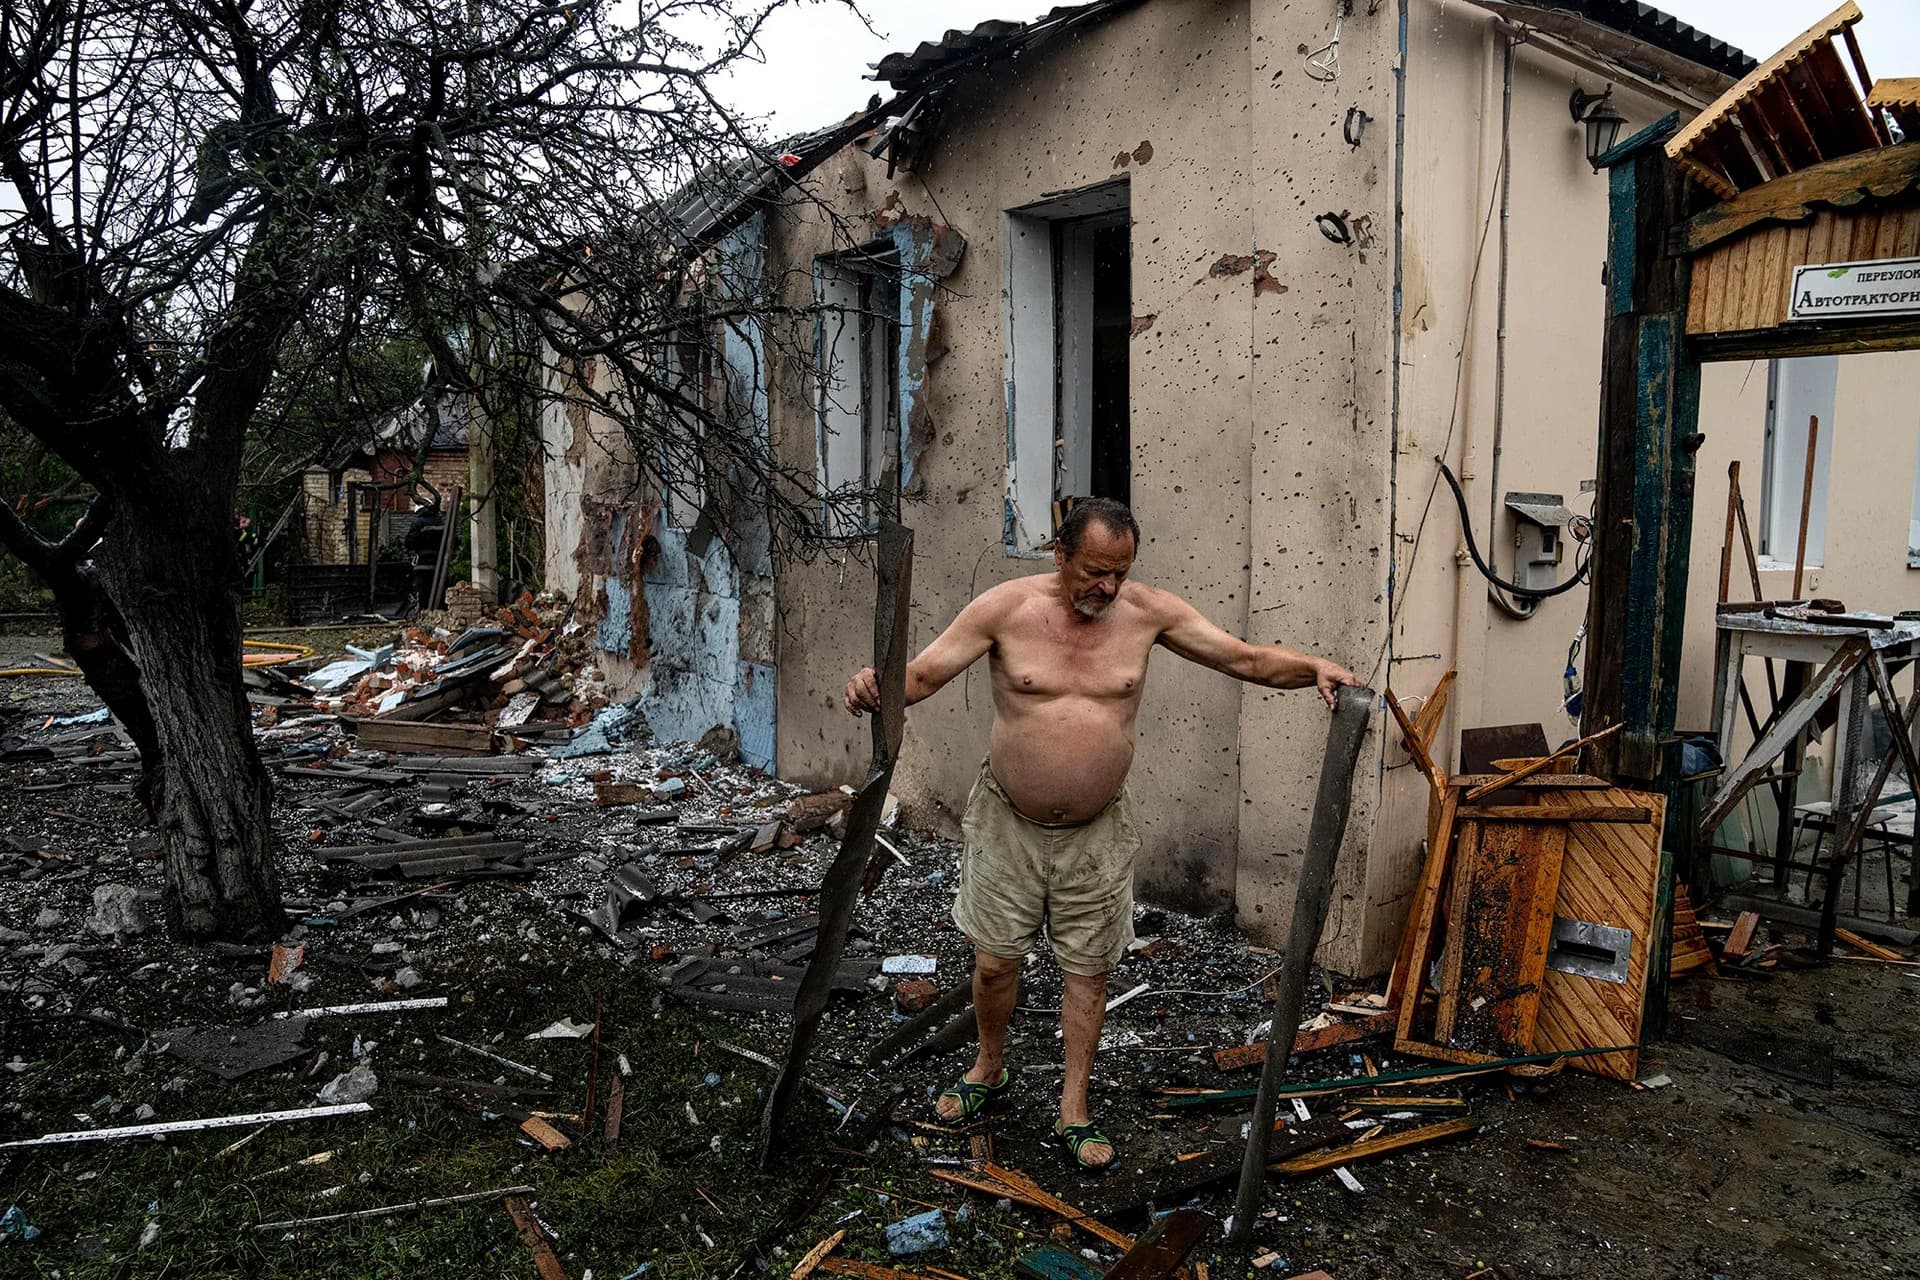 A local man clears rubble from his house which was destroyed after a Russian attack in a residential neighborhood in downtown Kharkiv